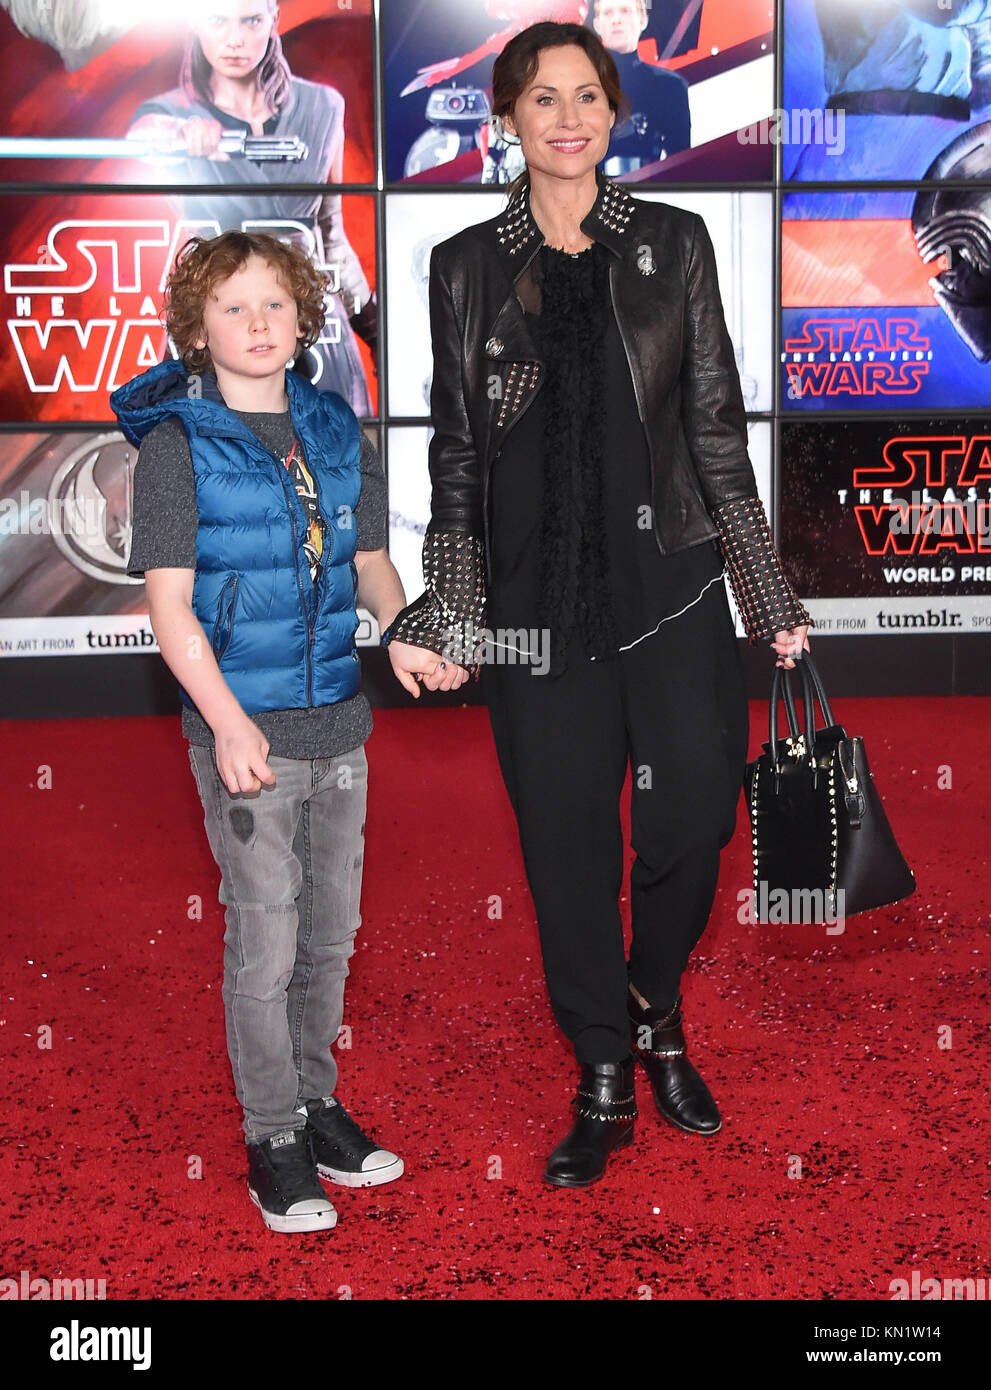 Los Angeles, California, USA. 9th Dec, 2017. Minnie Driver and Henry Story Driver arrives for the premiere of the film 'Star Wars: The Last Jedi' at the Shrine Auditorium. Credit: Lisa O'Connor/ZUMA Wire/Alamy Live News Stock Photo